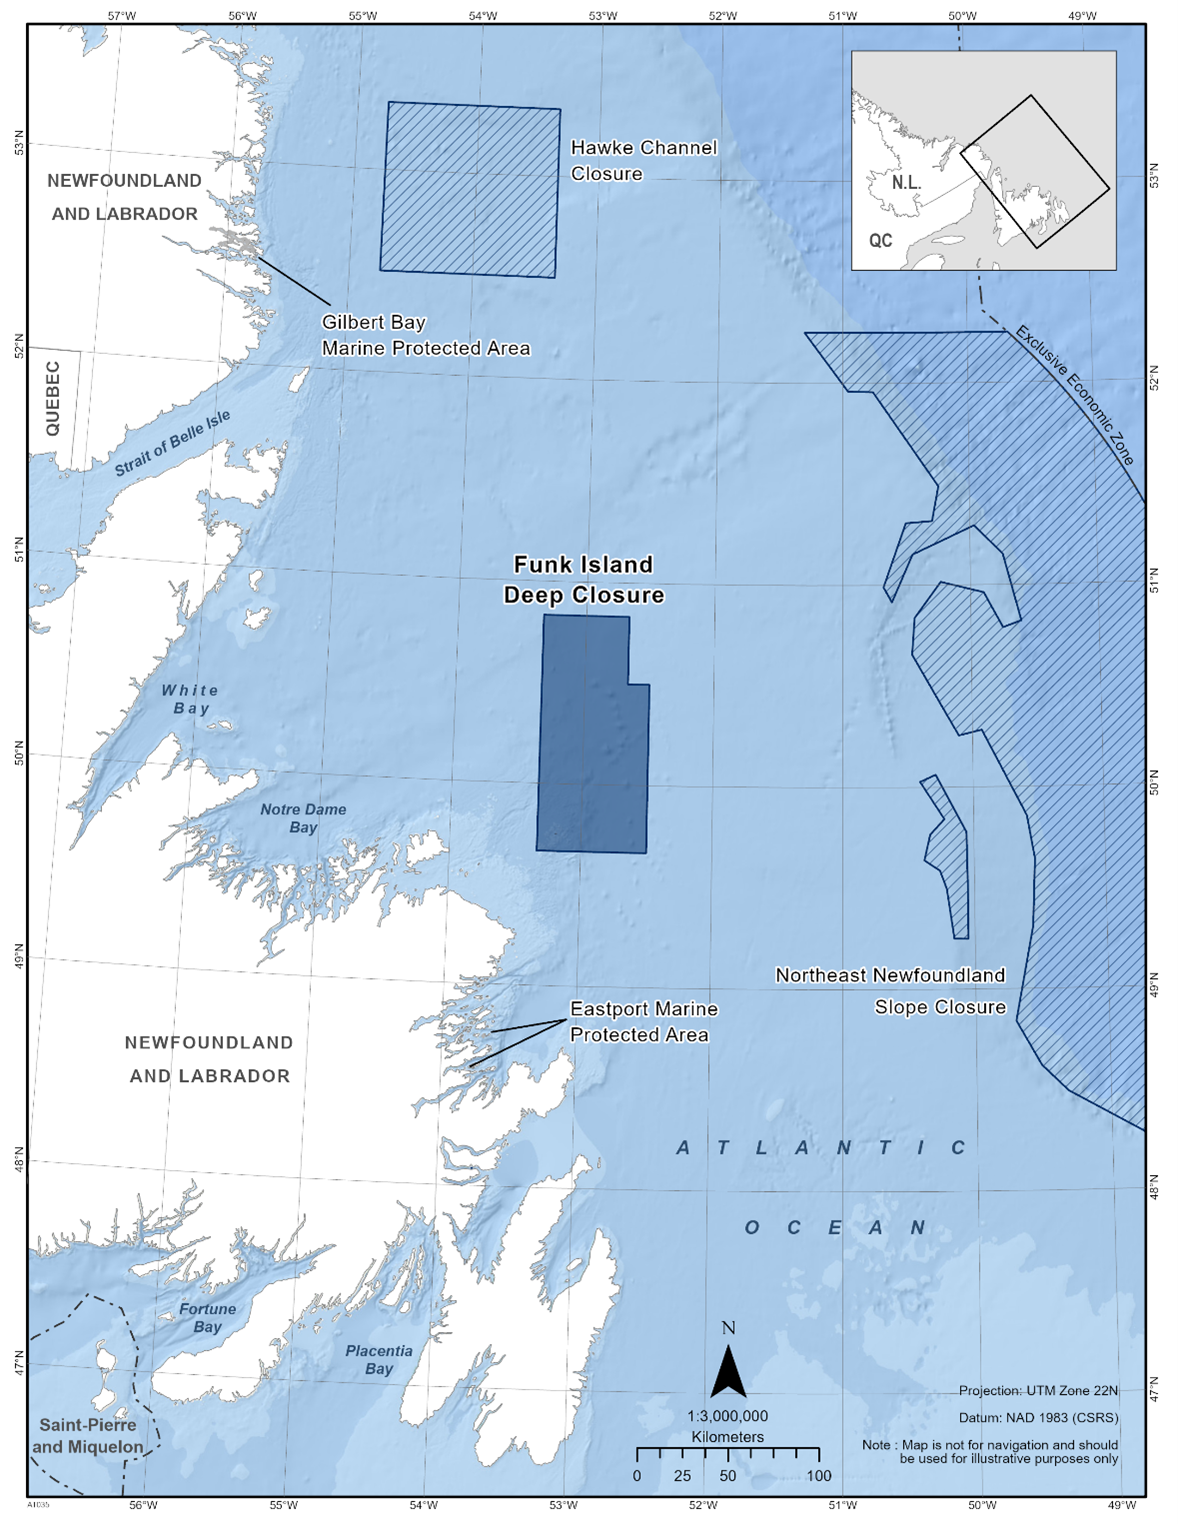 Map of the Funk Island Deep Closure in dark blue. The map also features other marine refuges nearby with dark blue diagonal lines (Hawke Channel Closure), Northeast Newfoundland Slope Closure).